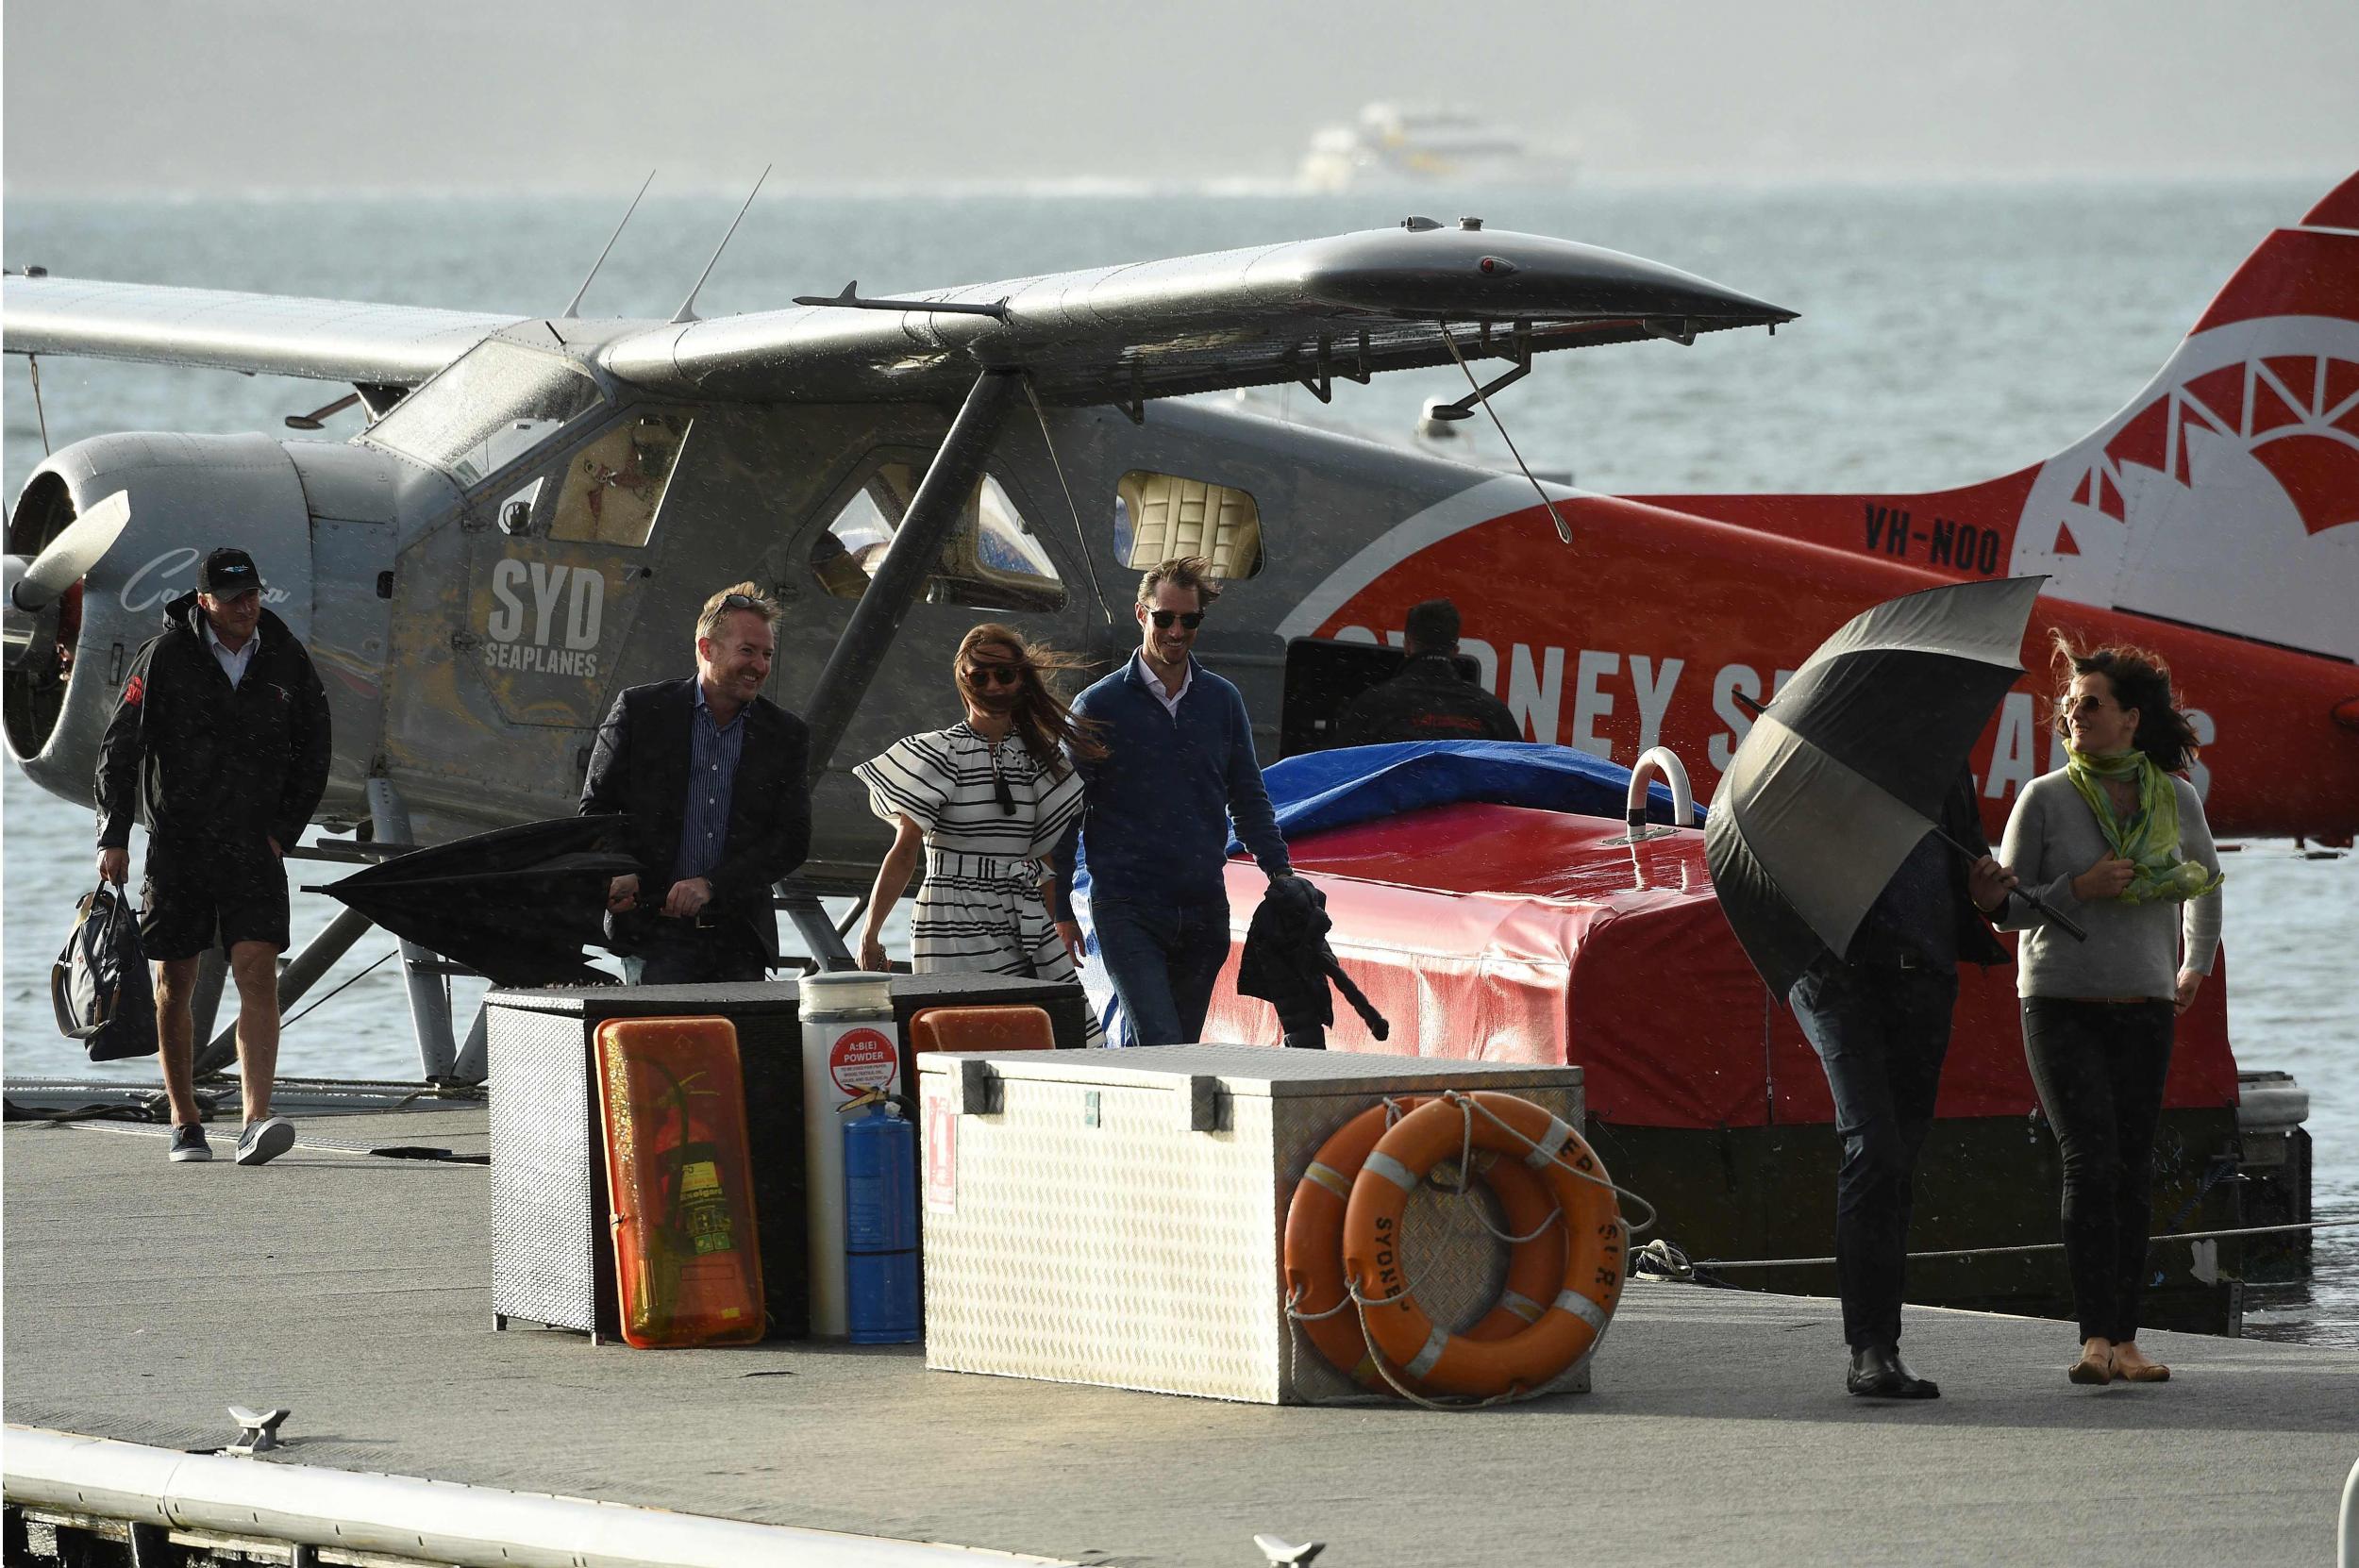 Pippa Middleton and her husband arrive at Rose Bay Wharf in Sydney by a sea plane operated Sydney Seaplanes (AFP/Getty)